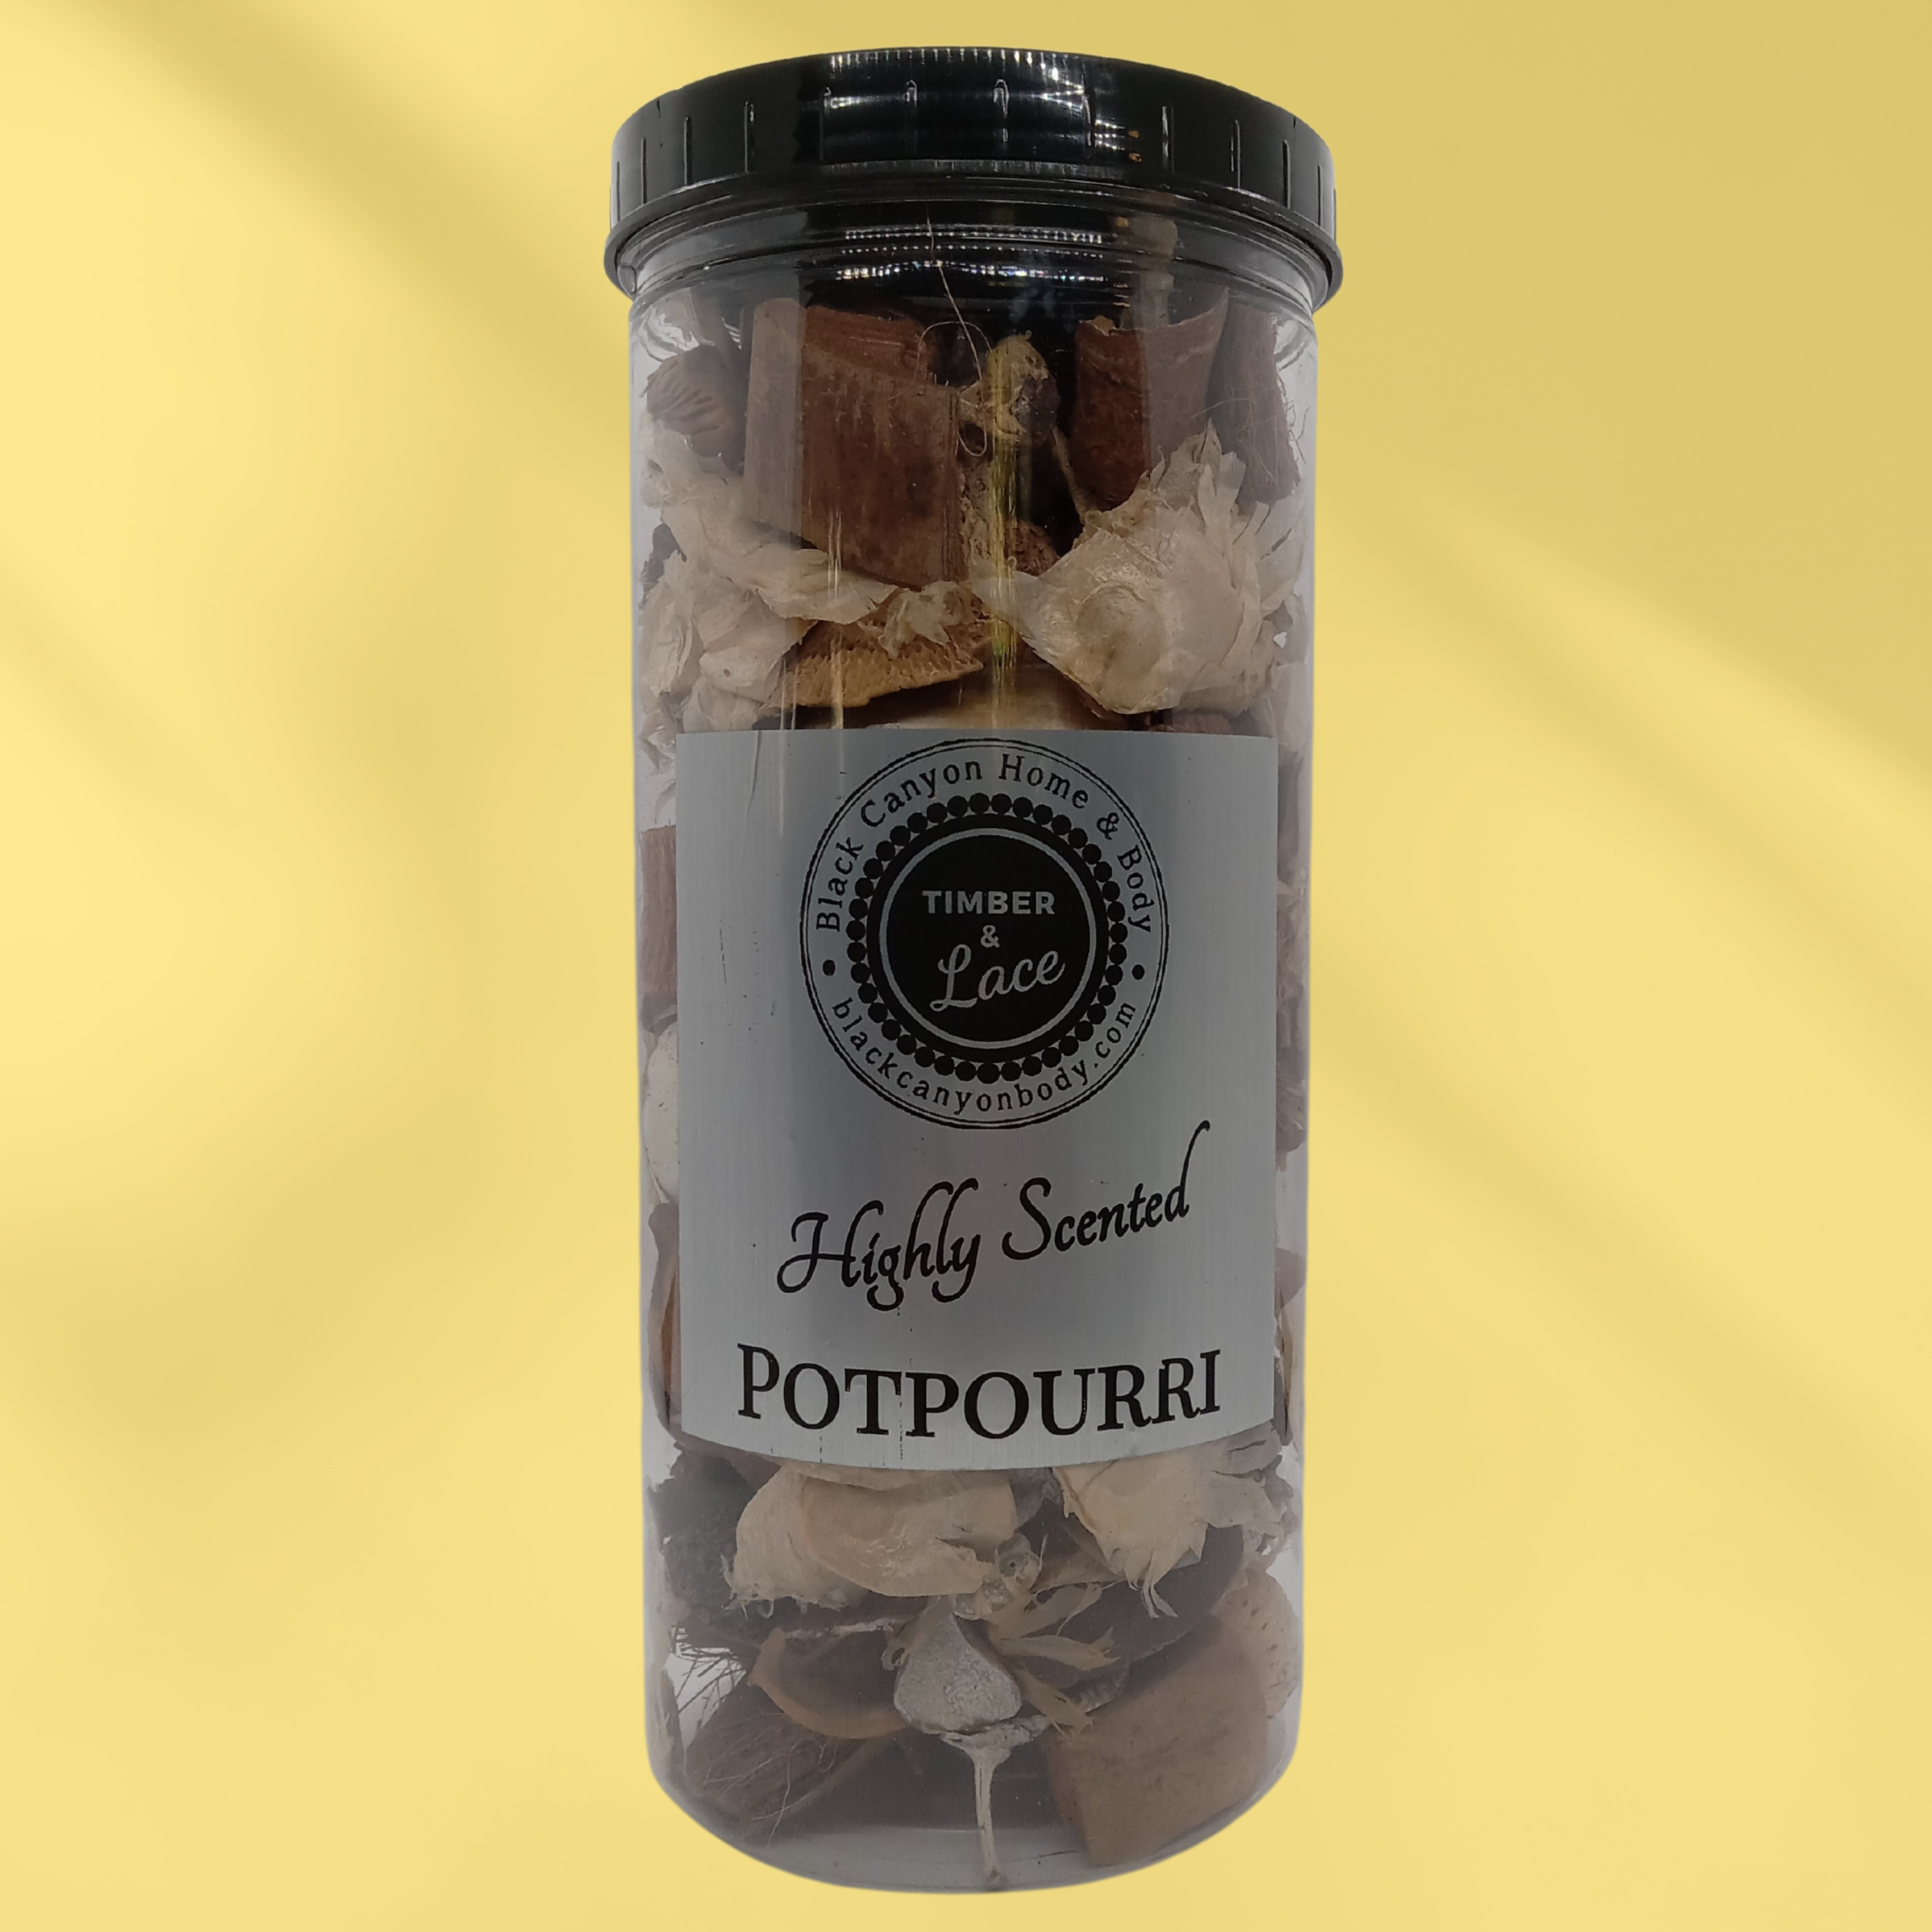 Timber & Lace Chocolate Chip Cookie Scented Potpourri